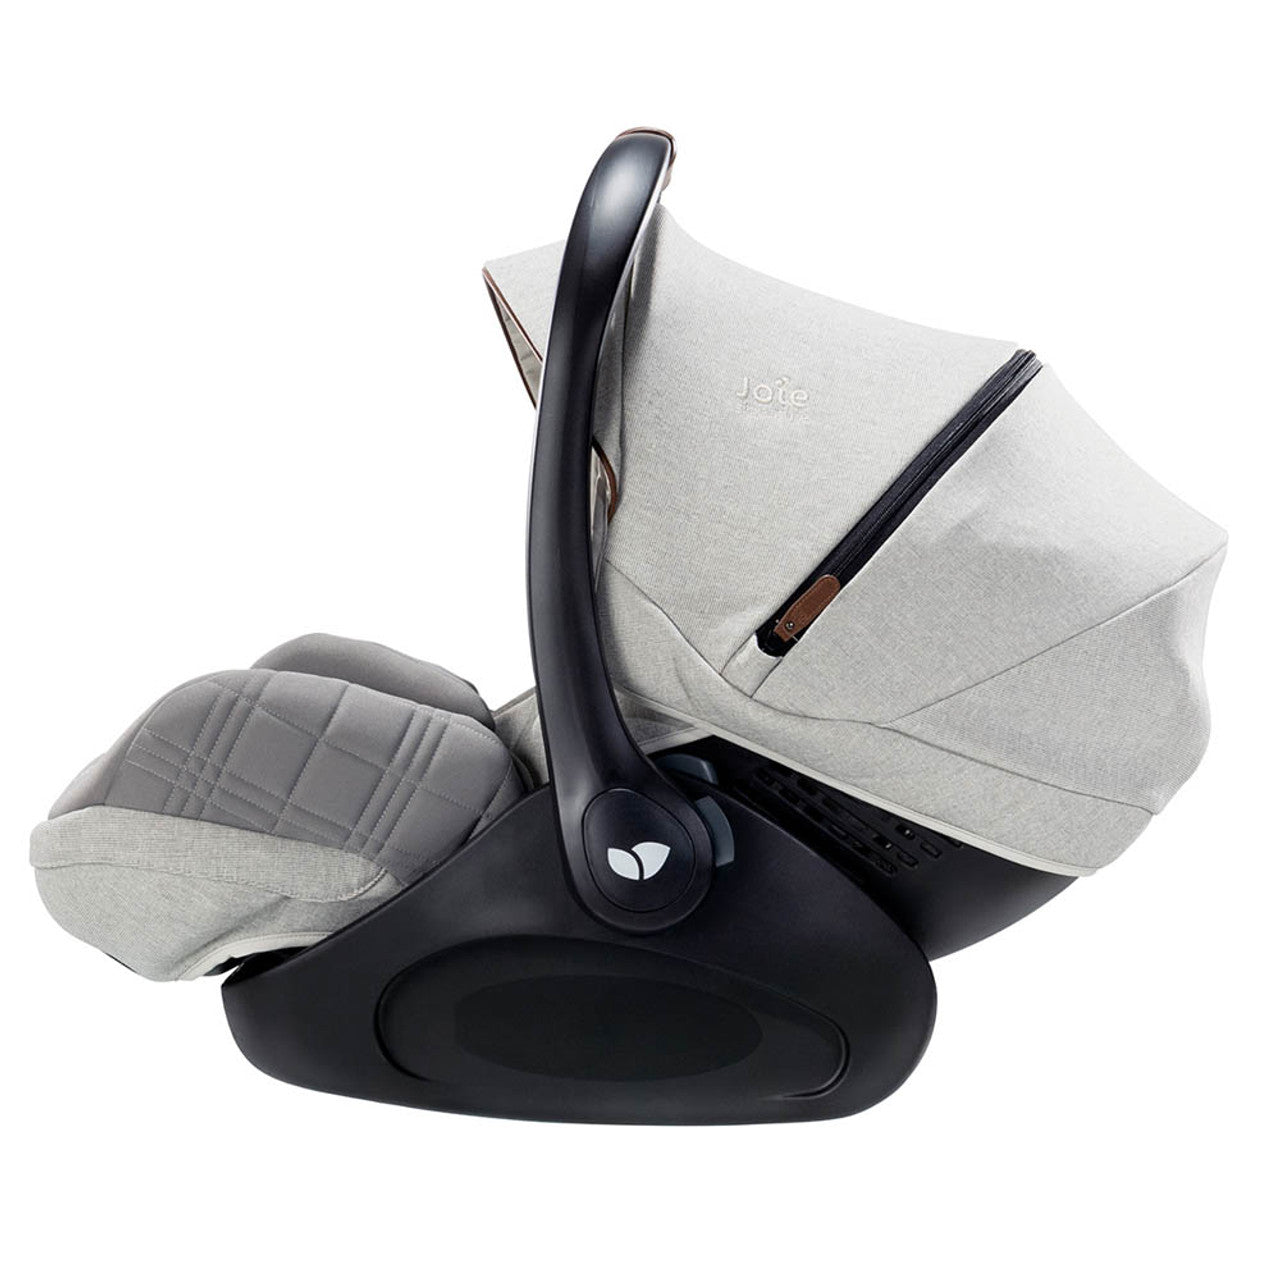 Joie i-Level Reclining Signature Car Seat - Oyster